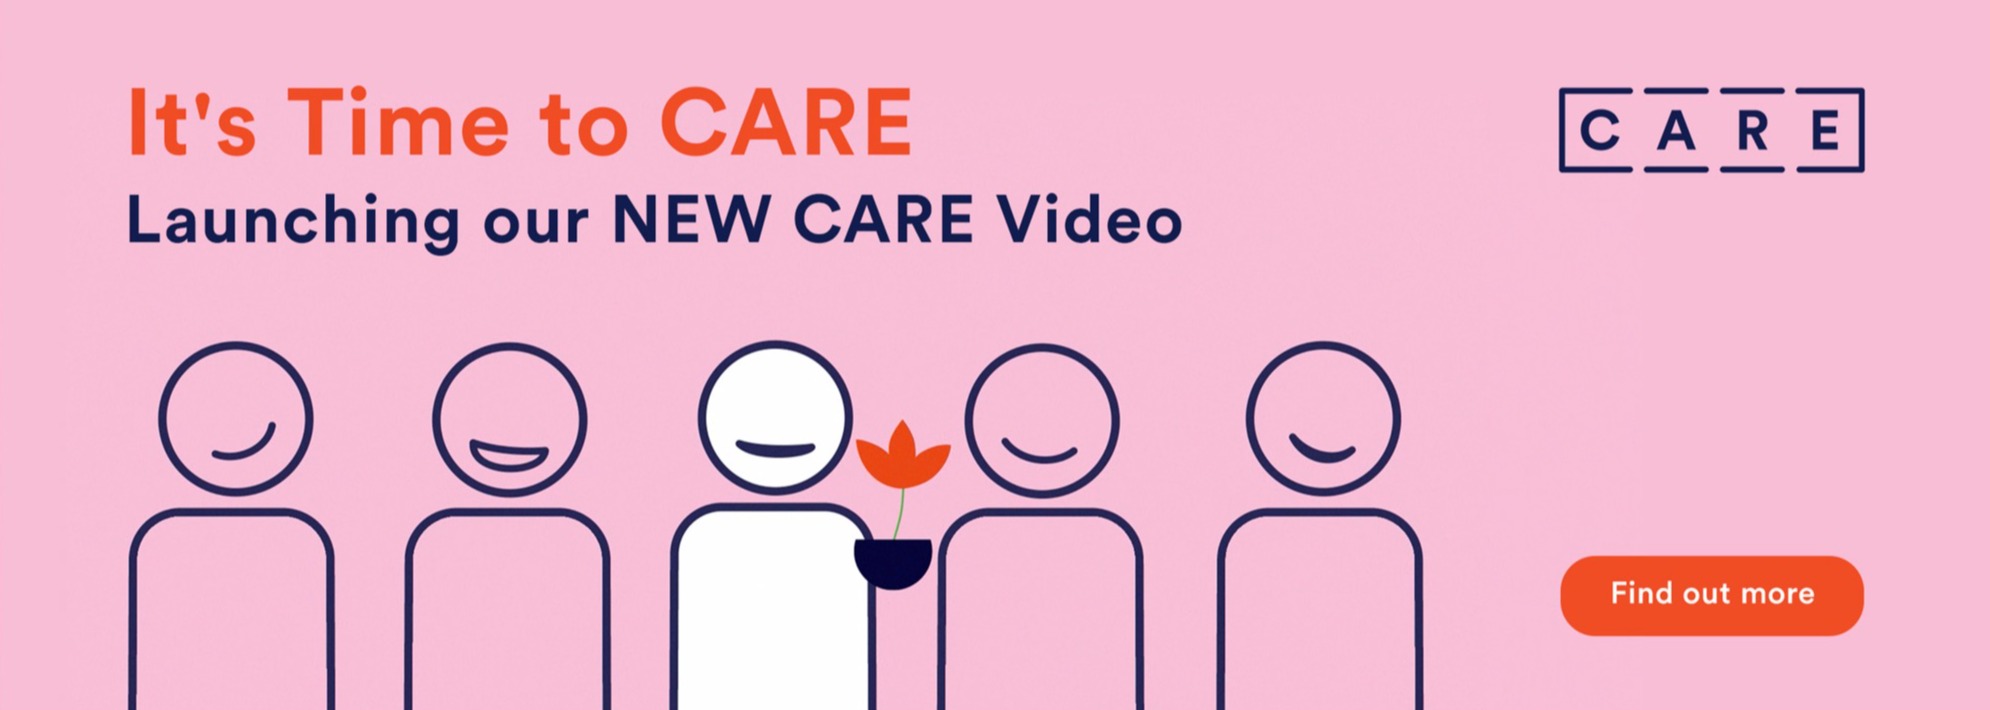 Discover the CARE experience